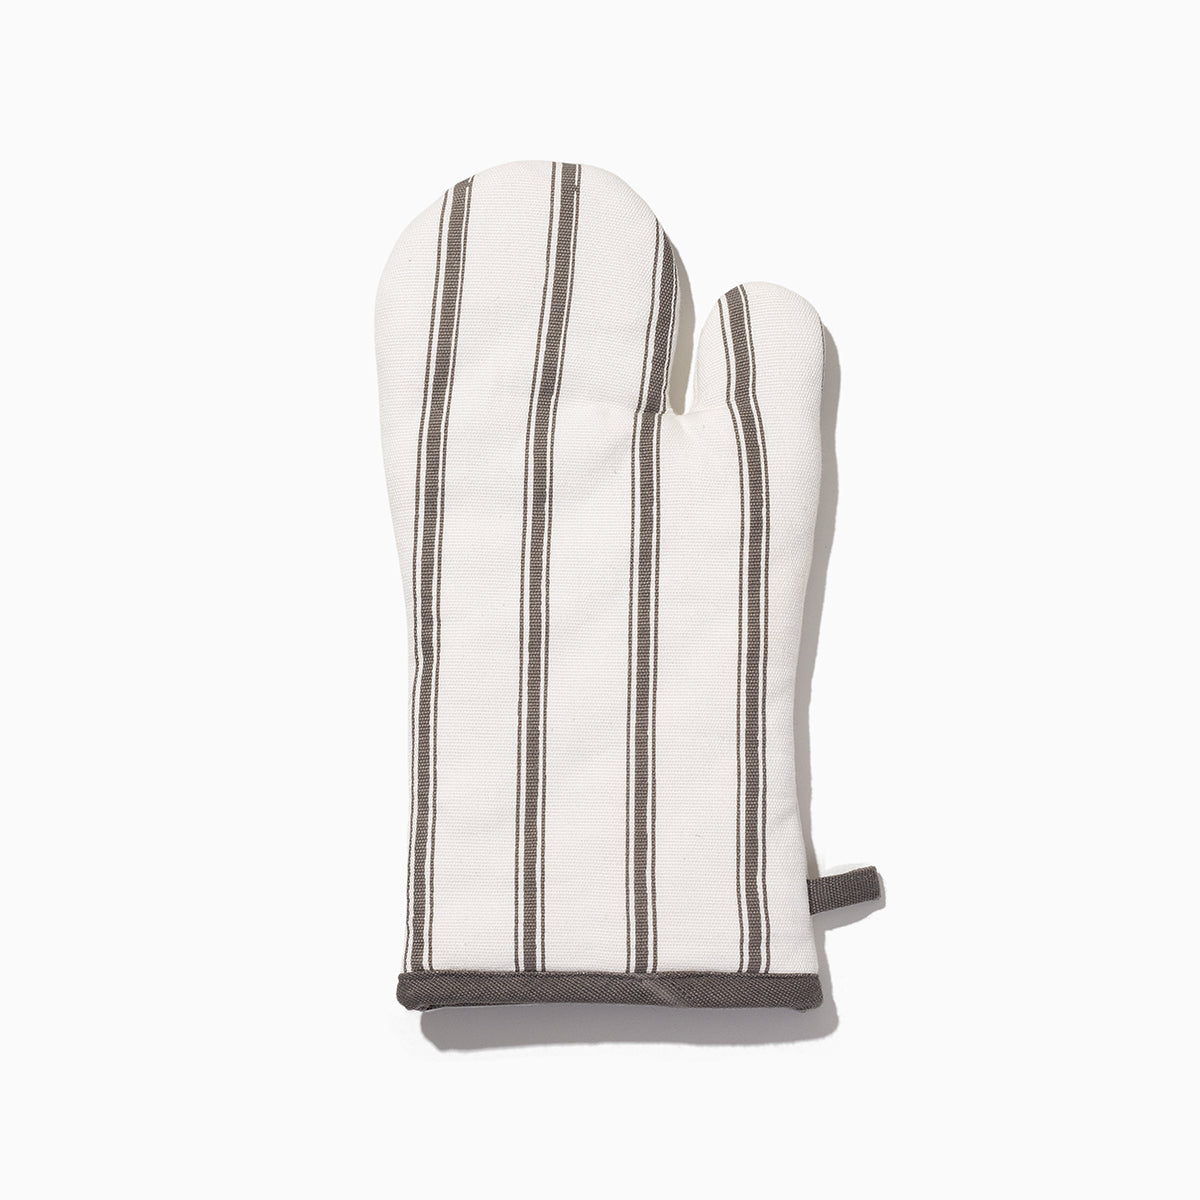 Classic Striped Oven Mitt | Product Image | Uncommon Lifestyle